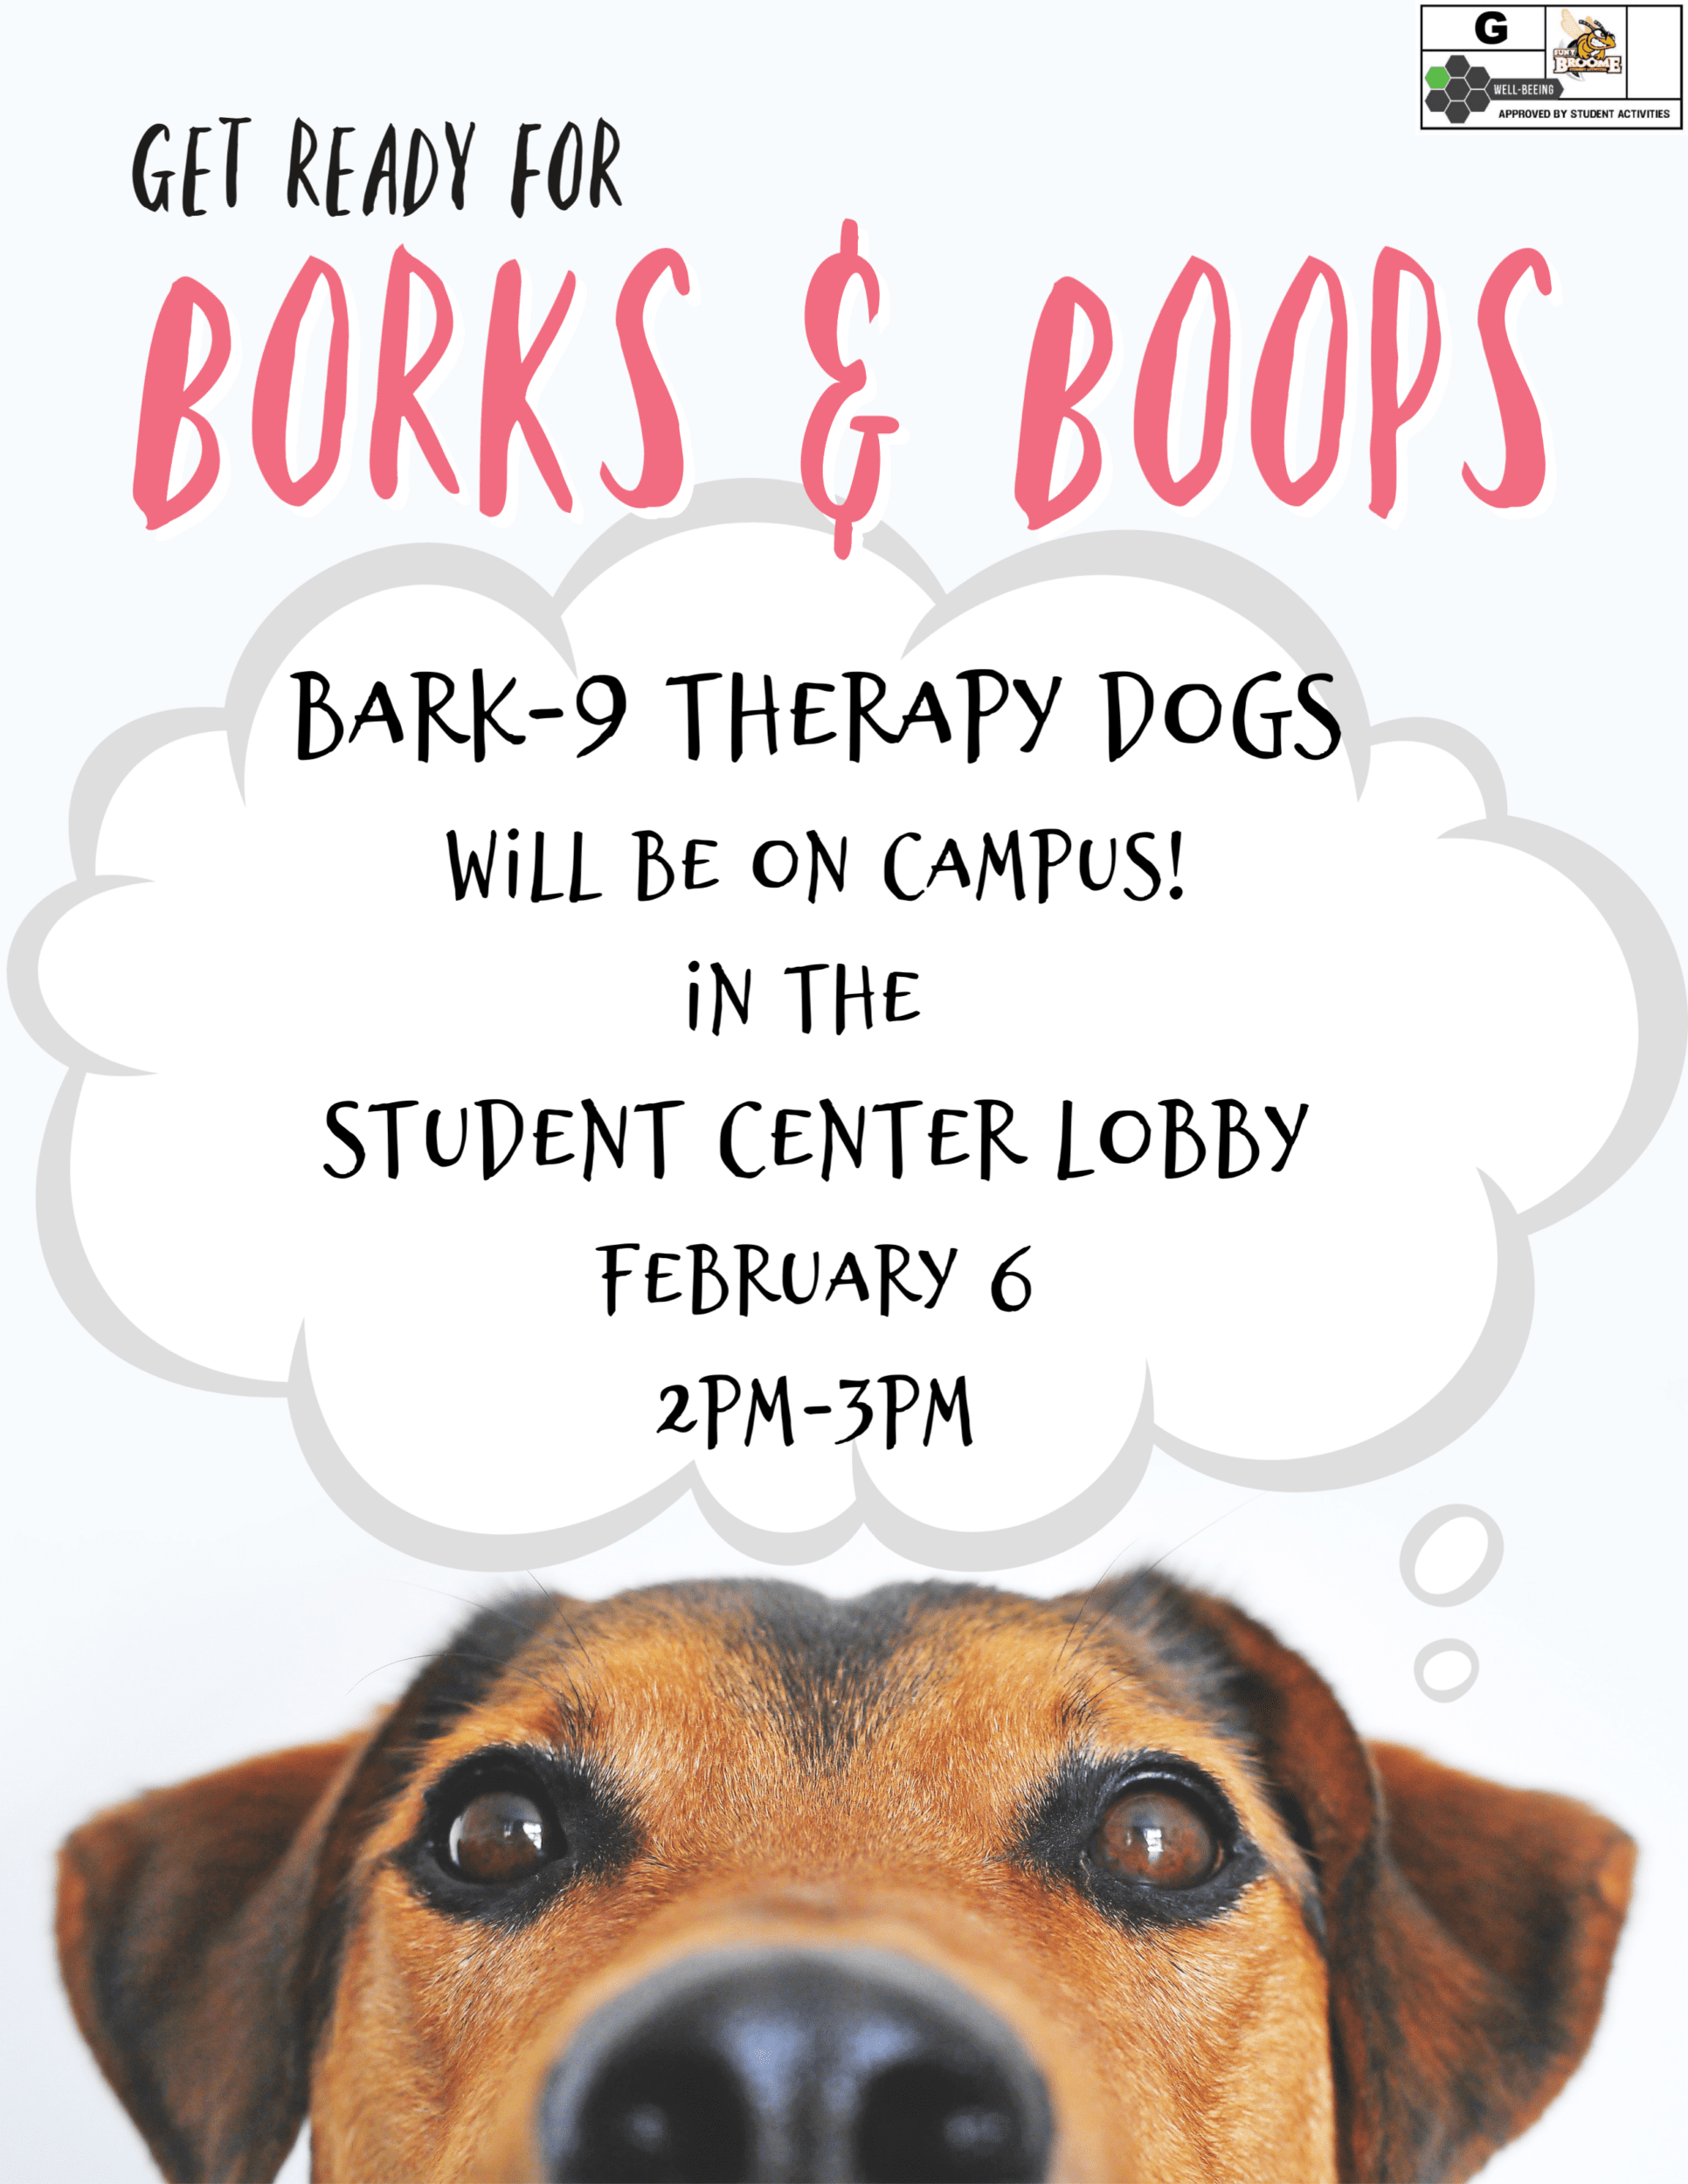 BARK-9 Therapy Dogs on campus Feb. 6